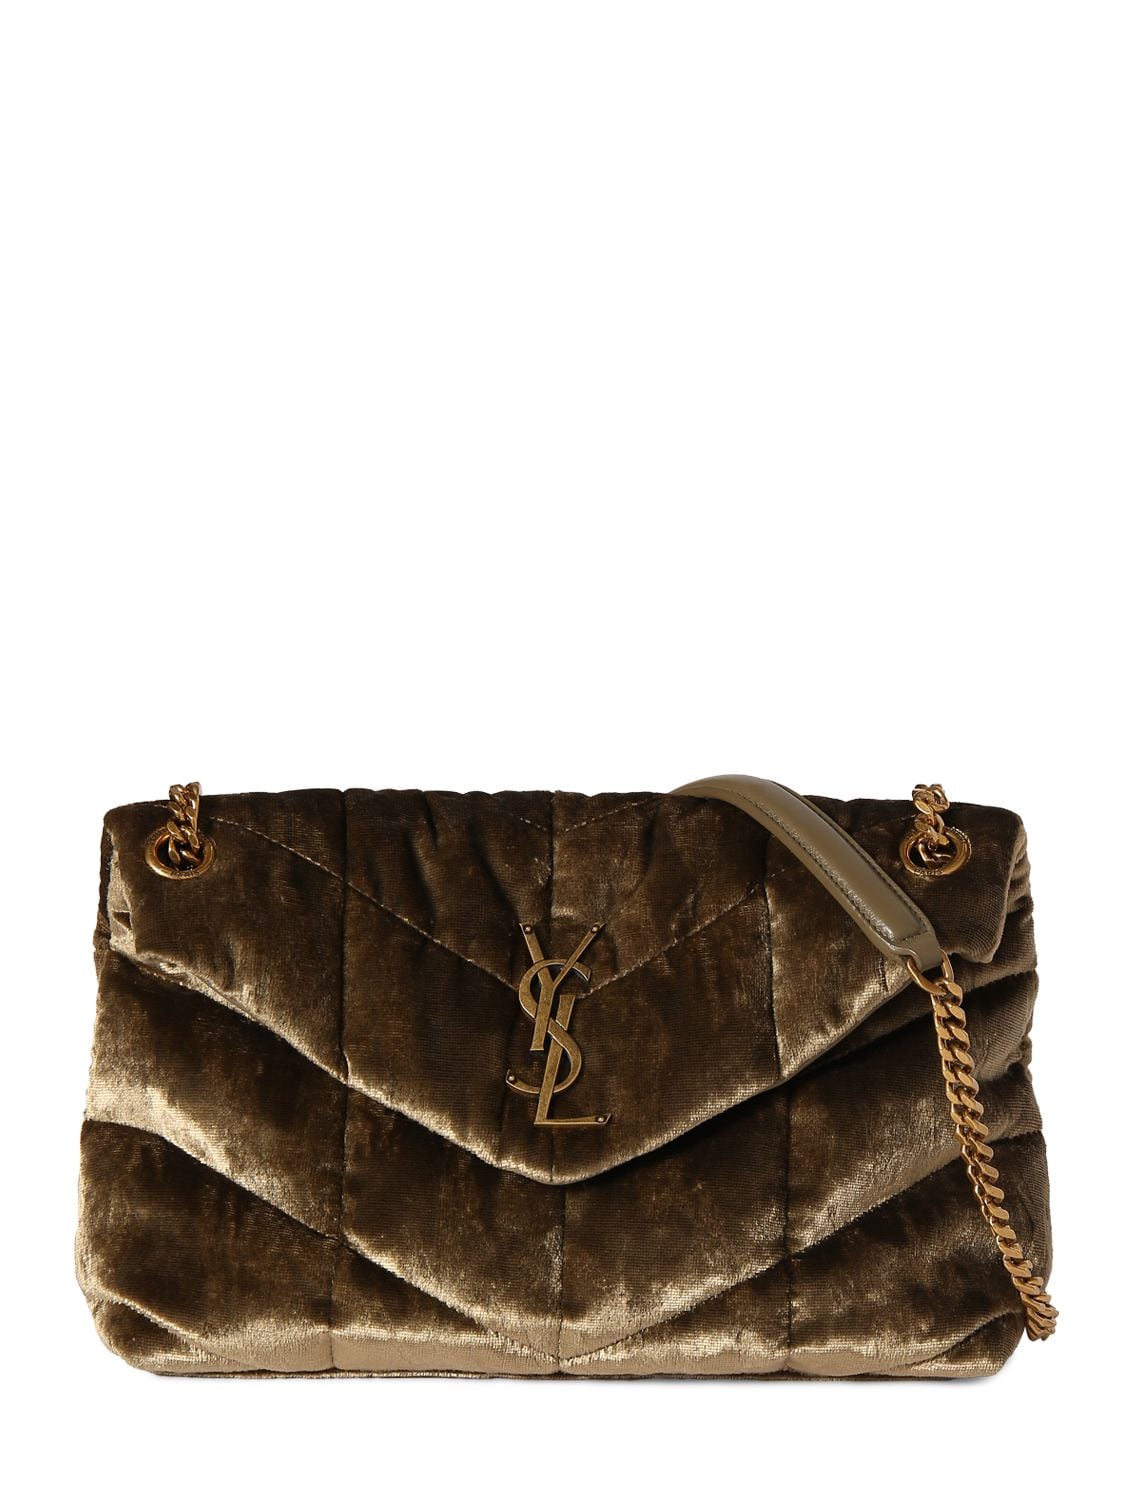 Saint Laurent Loulou Puffer Small Leather Shoulder Bag In Pale Olive